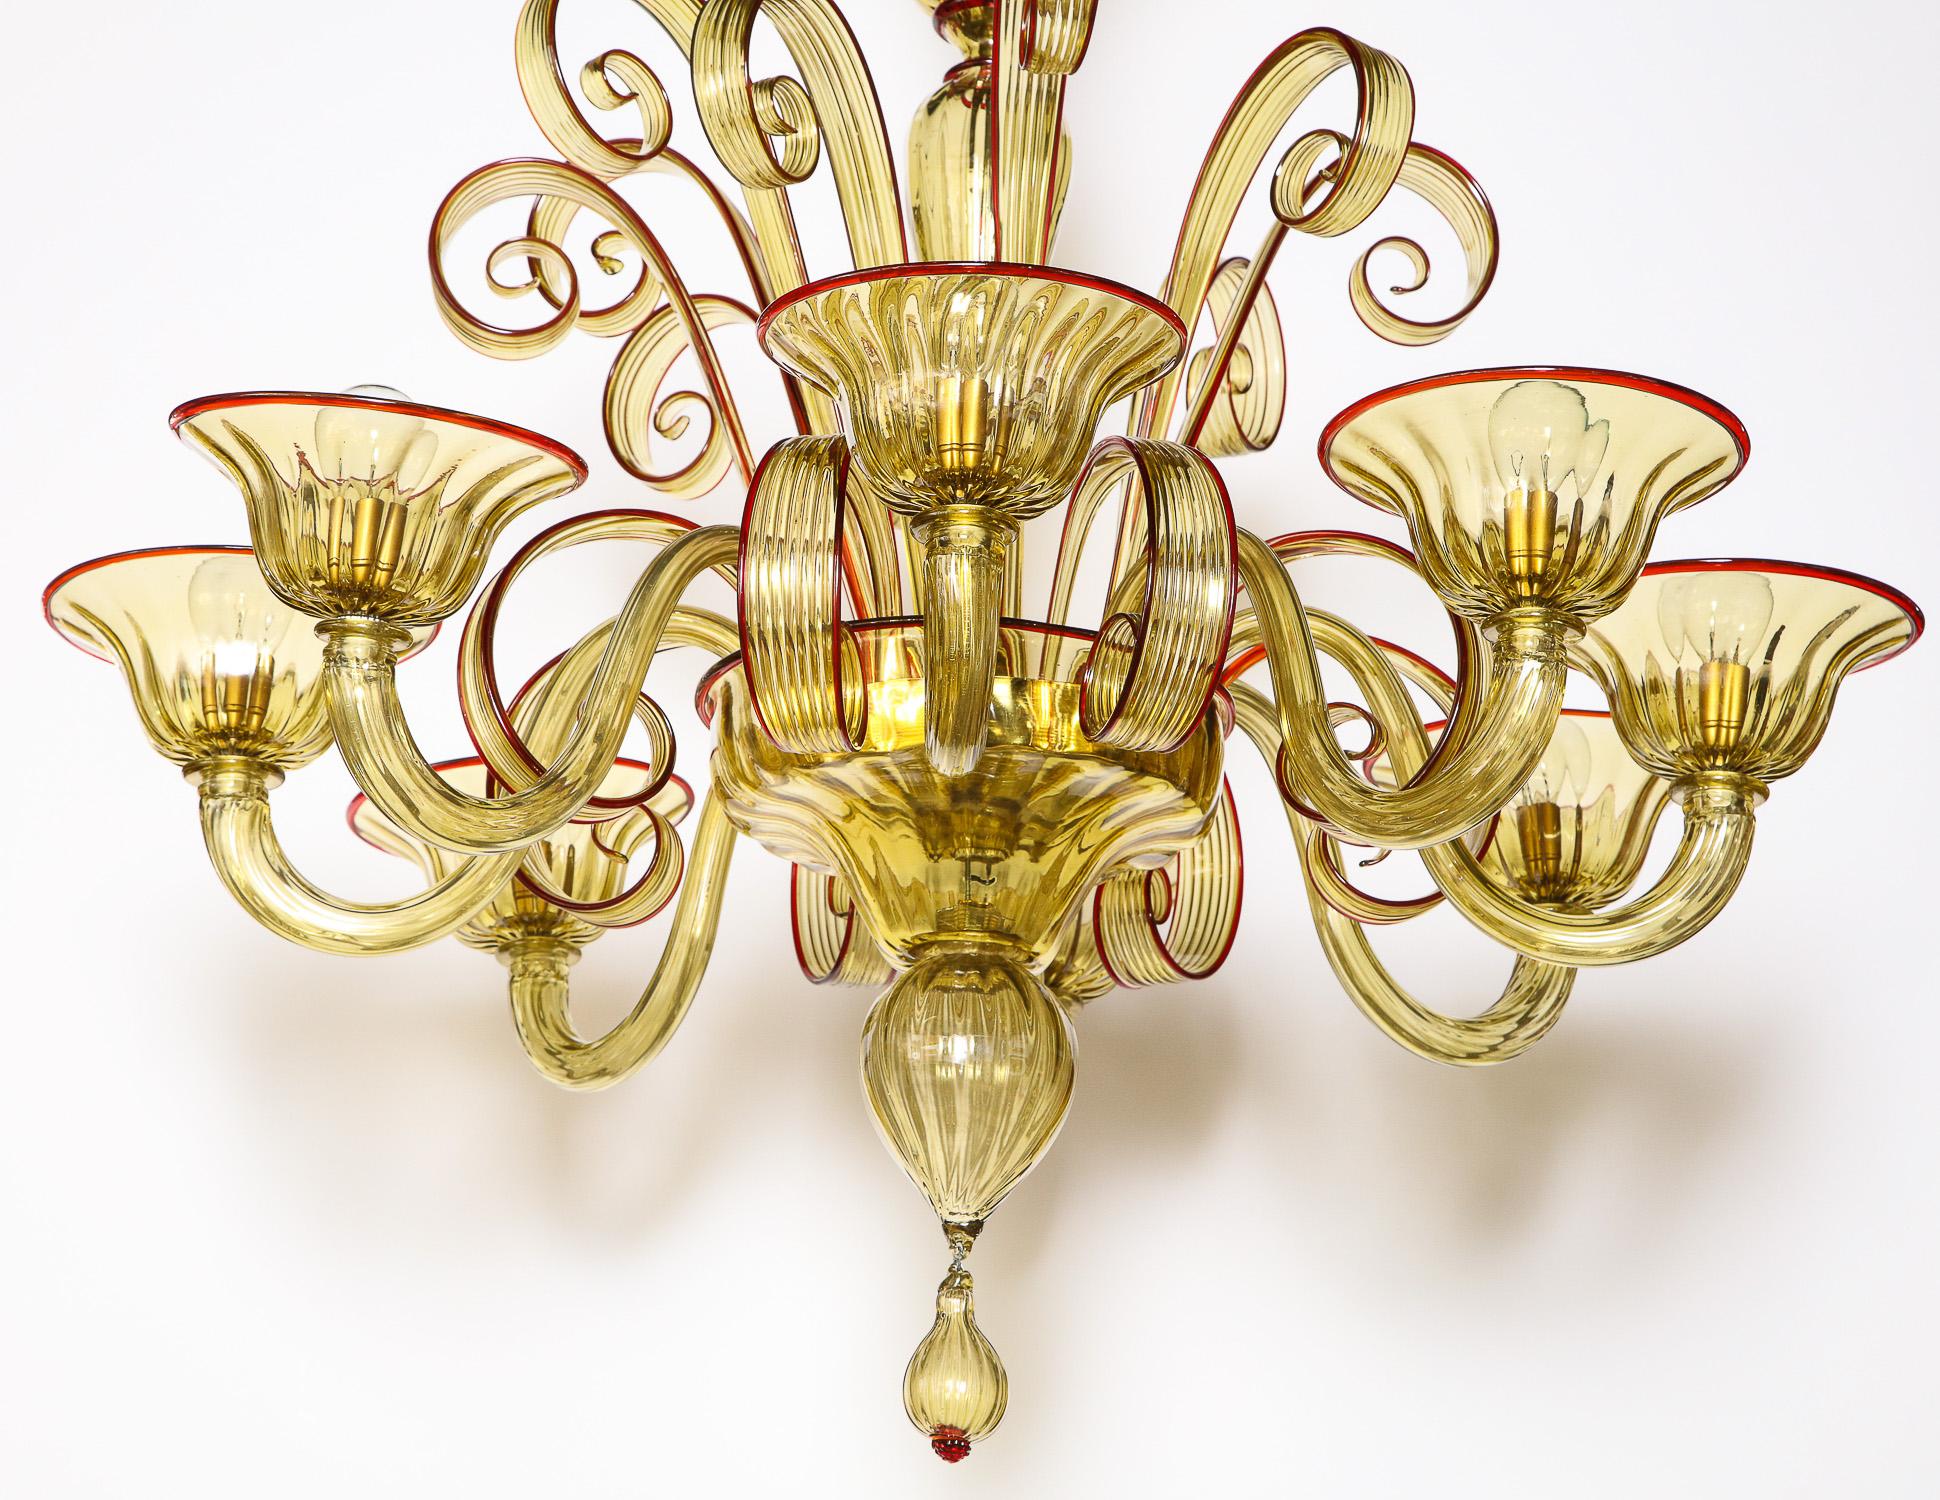 Venetian Glass Chandelier, Amber Color/Red, Contemporary, 8 Arms, Murano, Italy For Sale 7